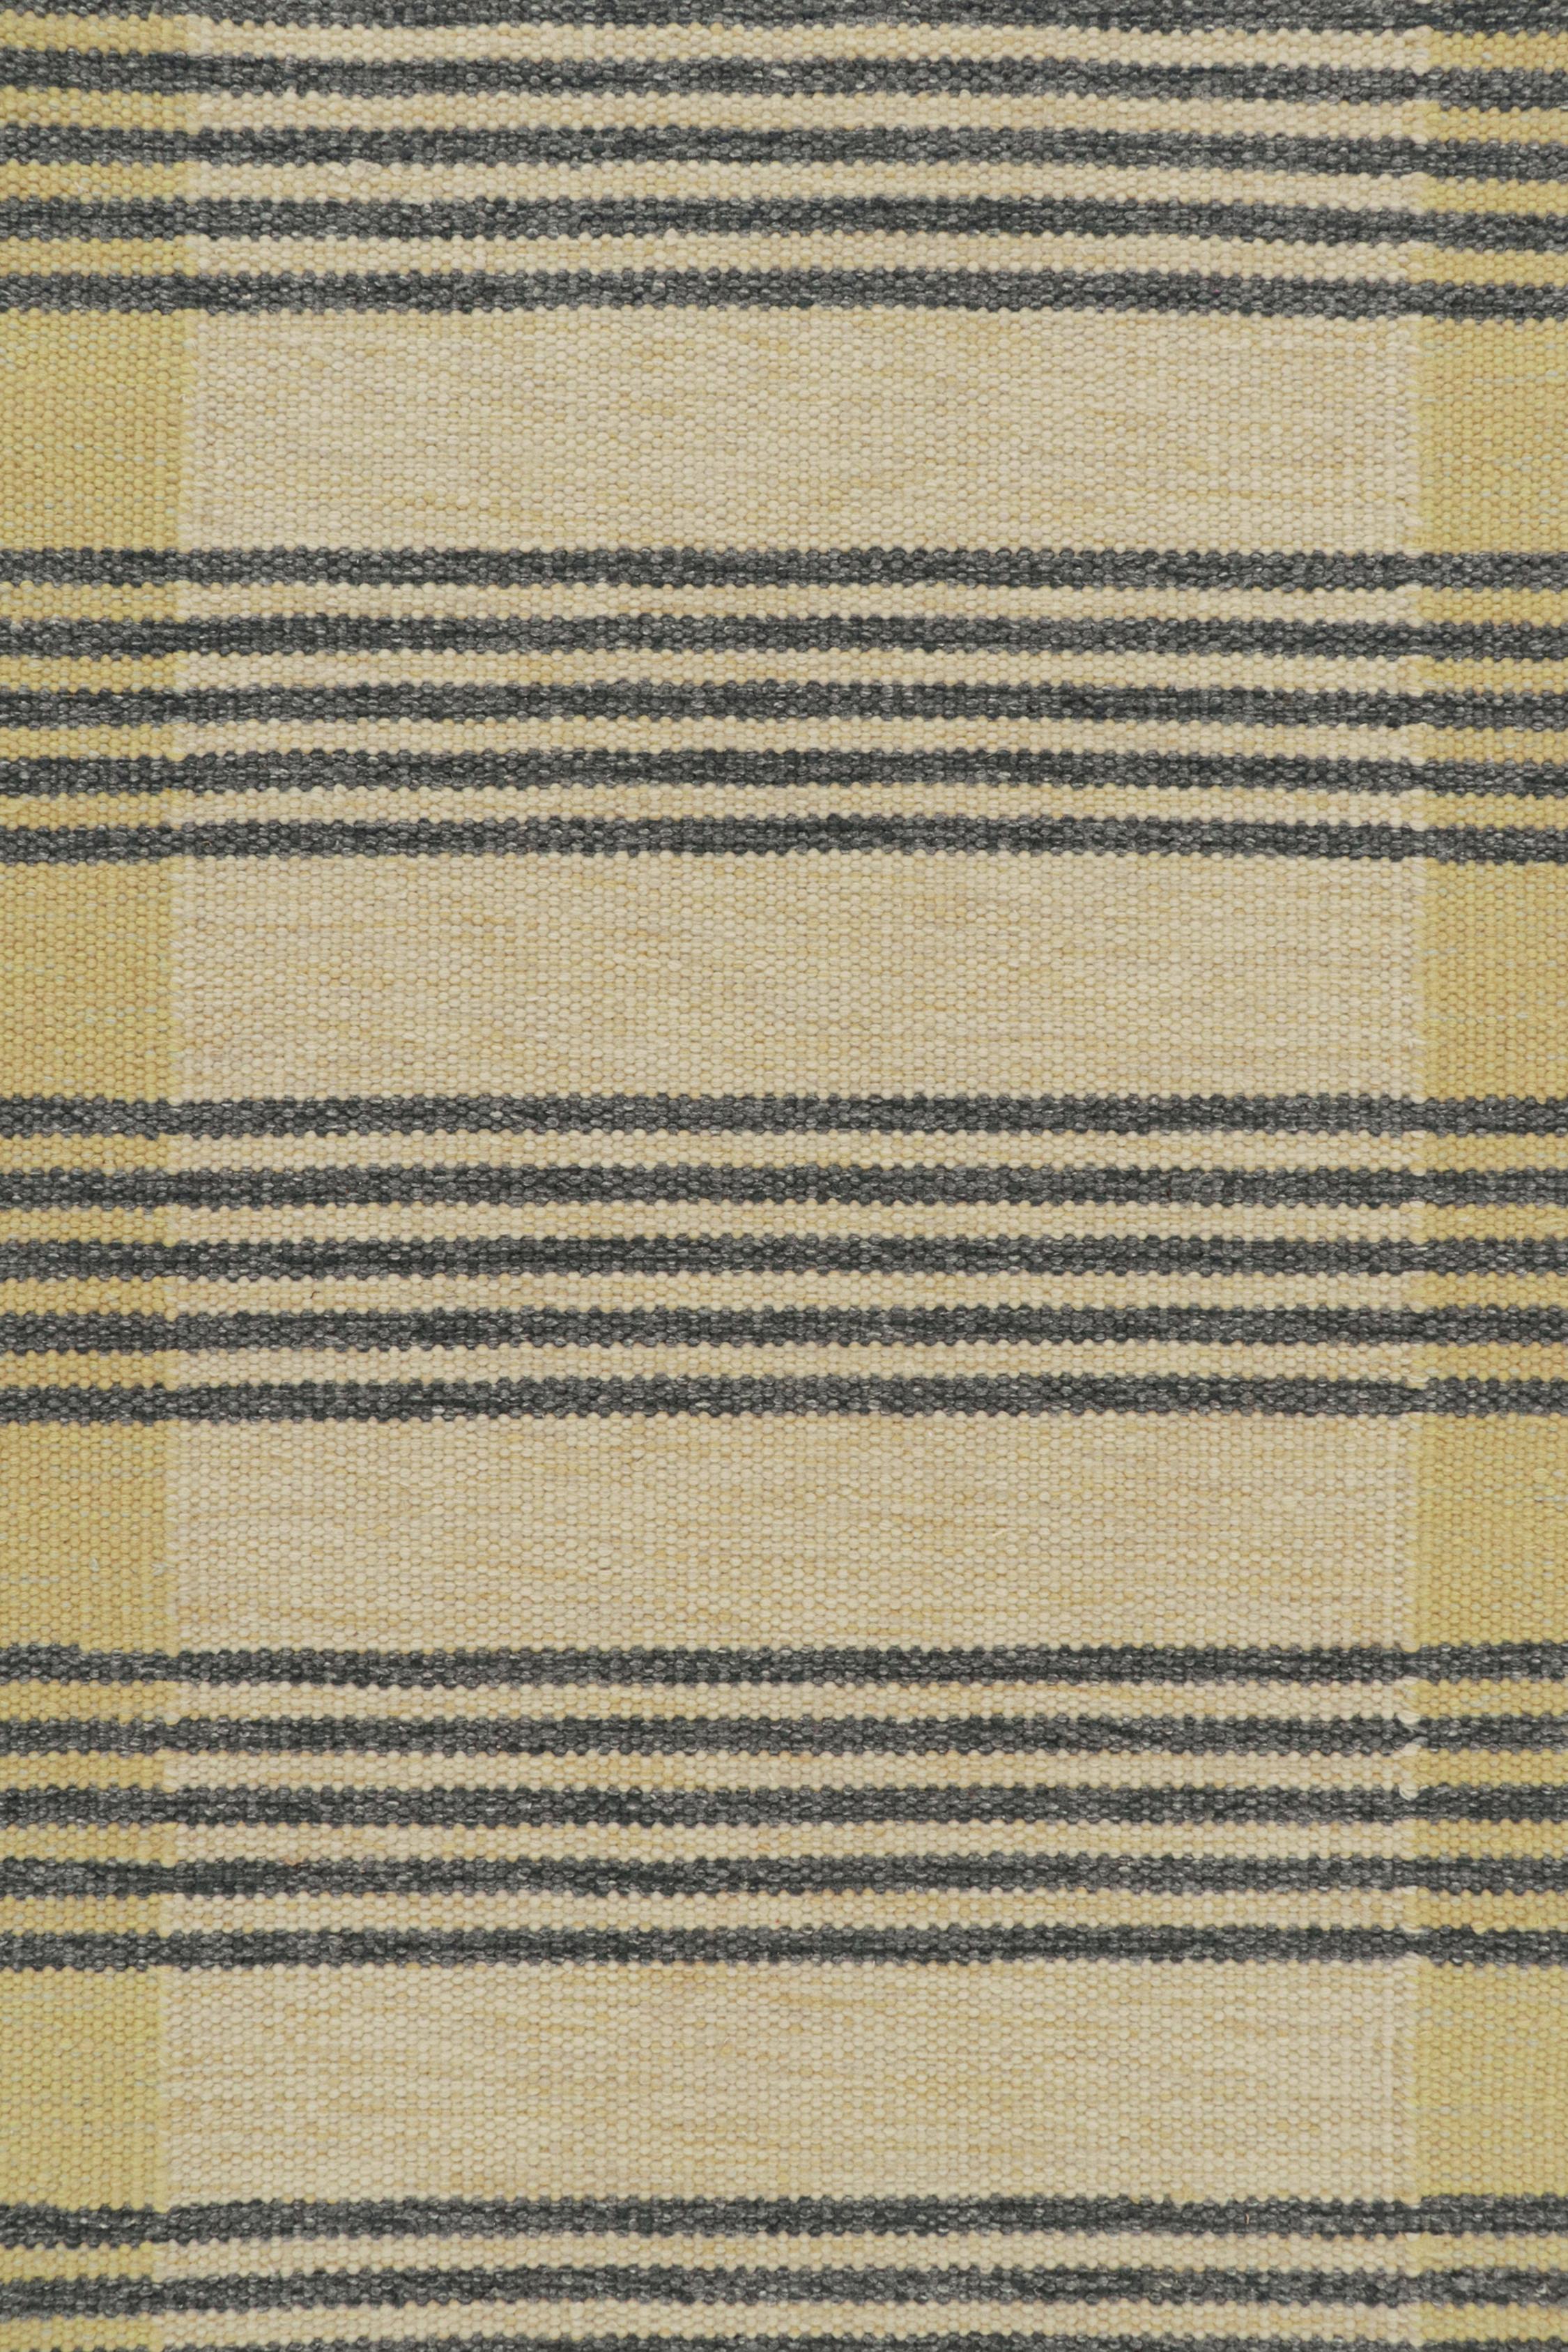 Rug & Kilim’s Scandinavian Style Kilim in Cream with Gray Stripes Patterns In New Condition For Sale In Long Island City, NY